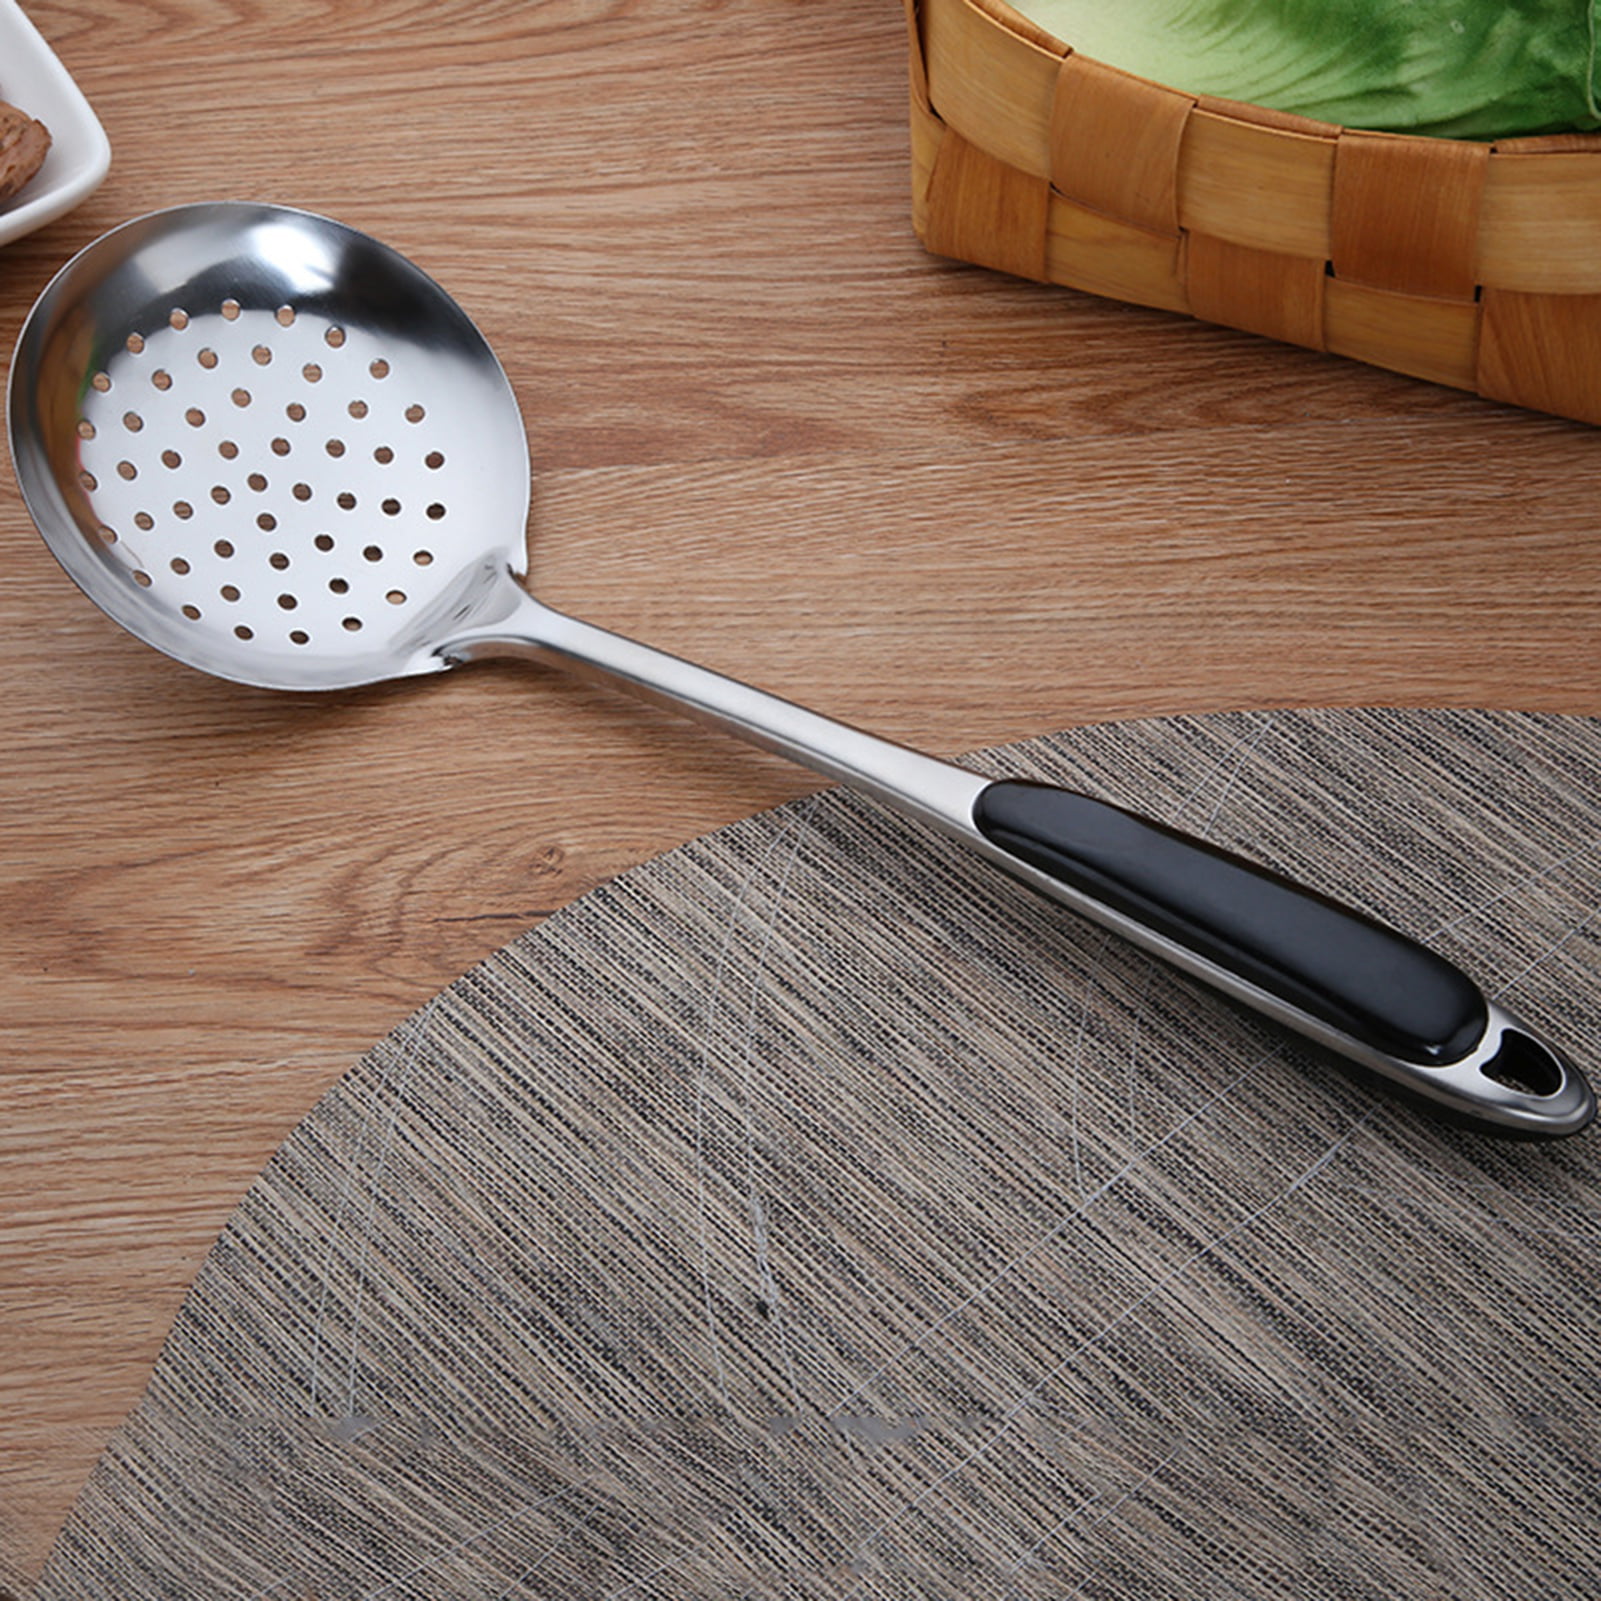 Stainless Steel Soup Ladle Spoon Wooden Handle Cookware Utensil - 10.4 x  3(L*W)